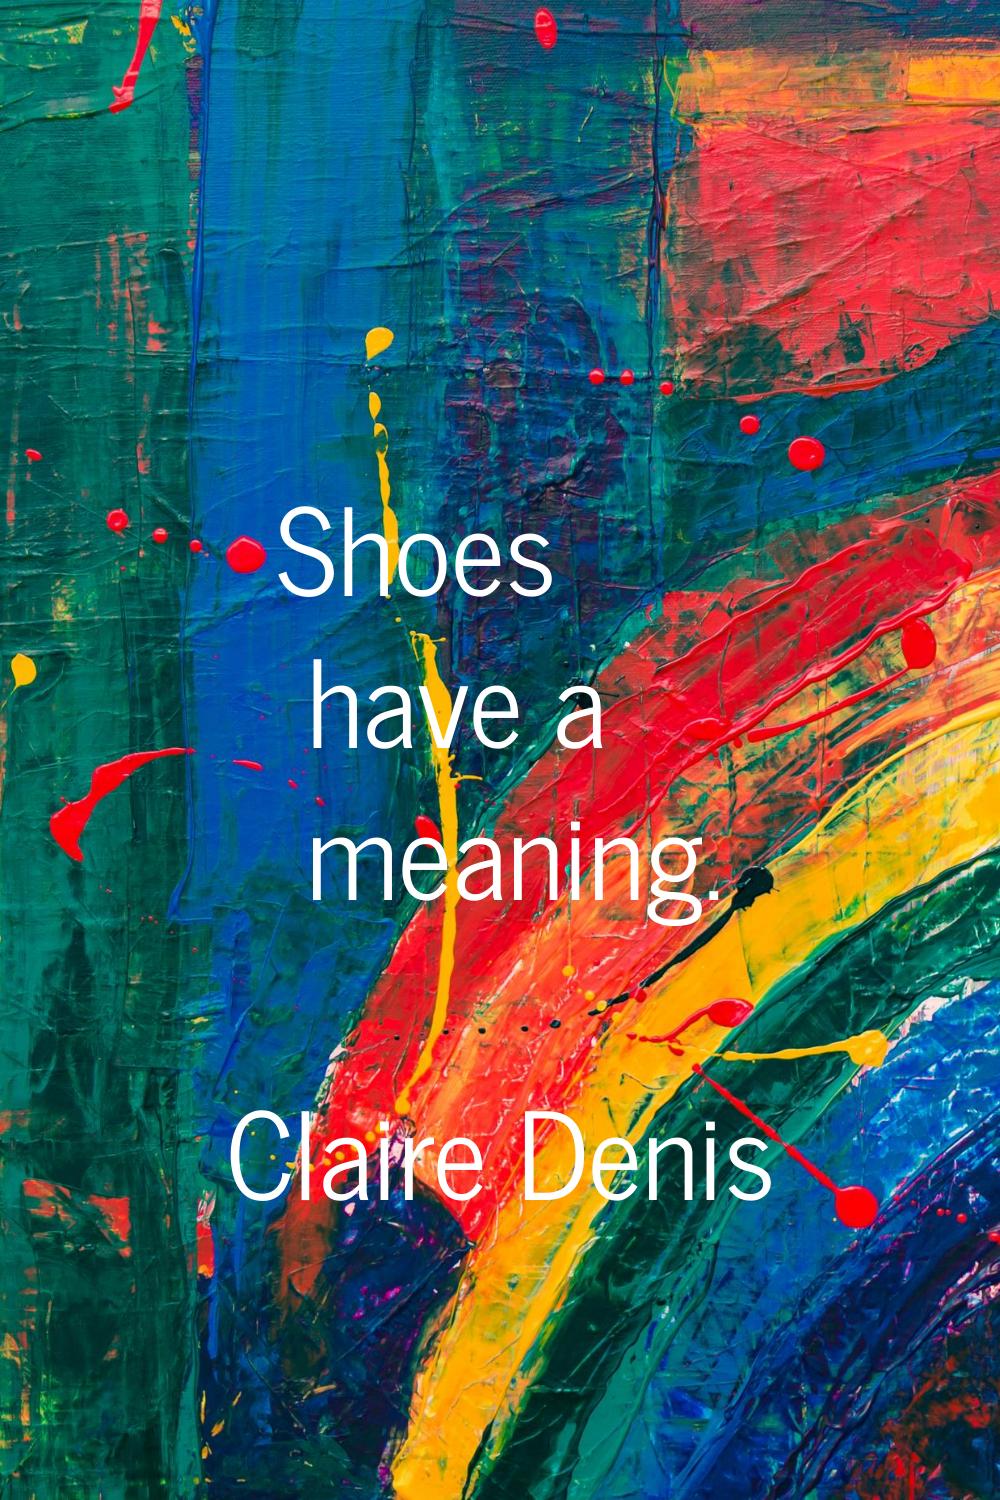 Shoes have a meaning.